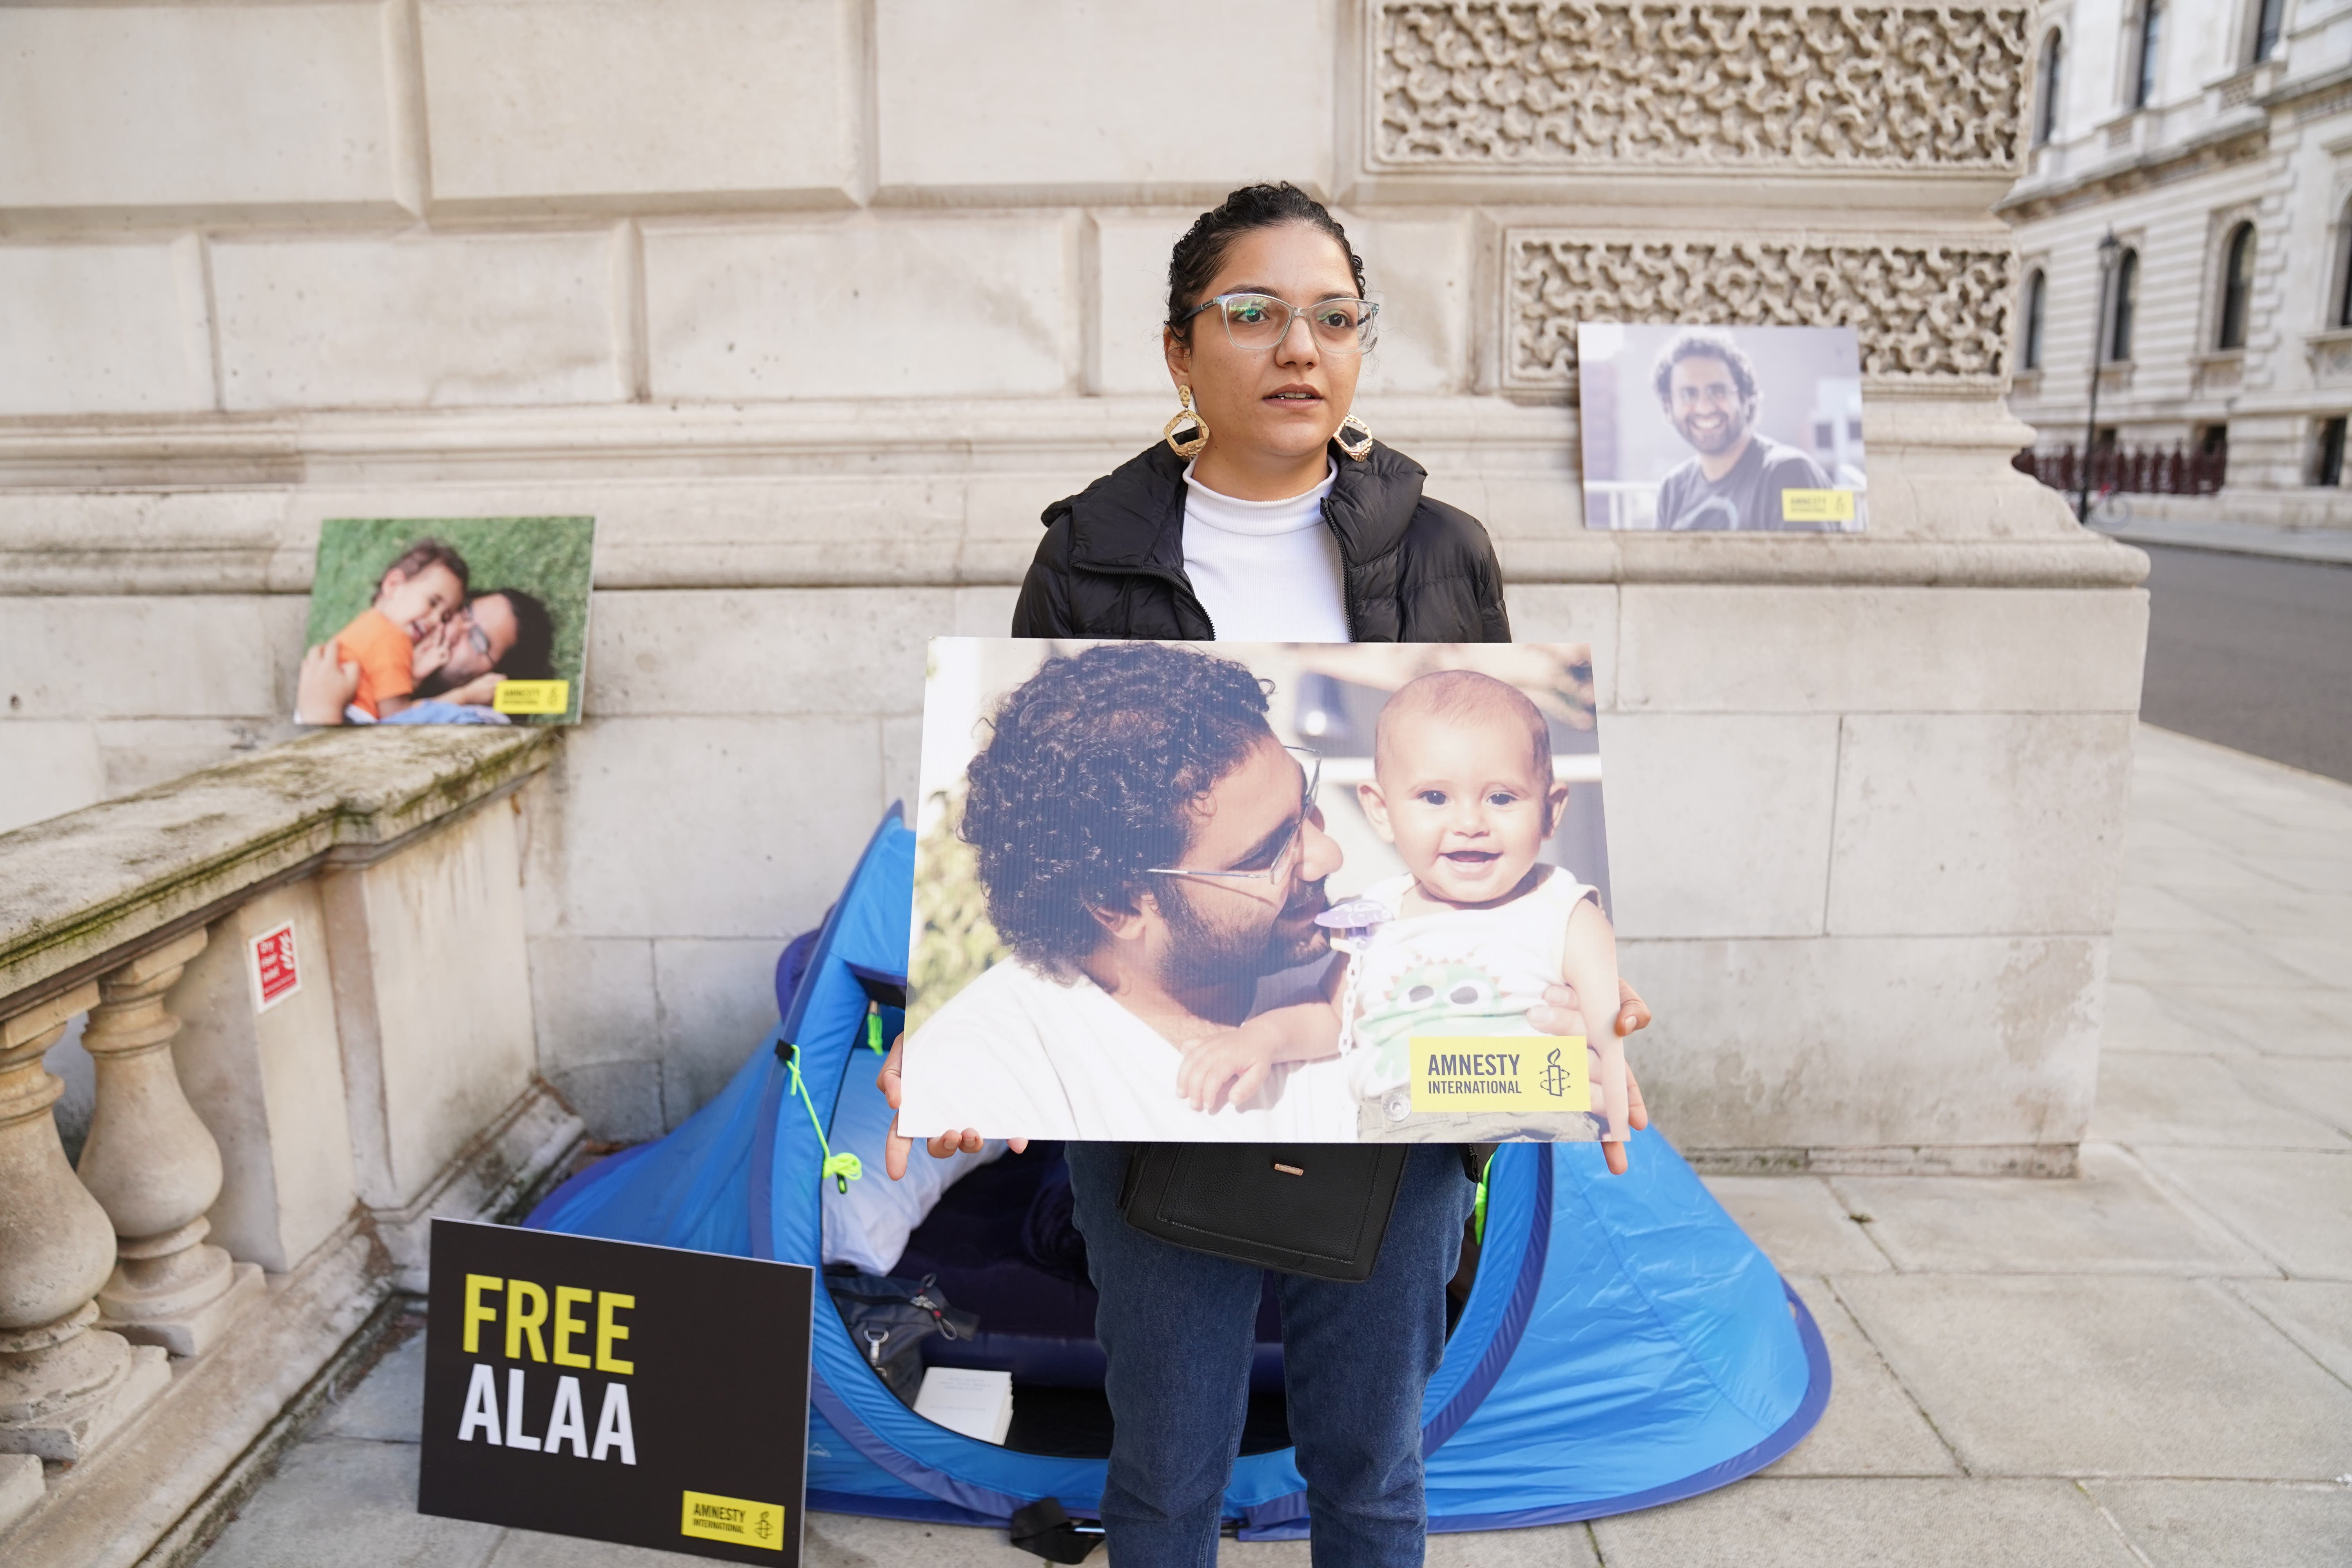 Sanaa Seif, the sister of writer Alaa Abd el-Fattah, a British-Egyptian activist imprisoned in Egypt, protests outside the Foreign Office (Stefan Rousseau/PA)